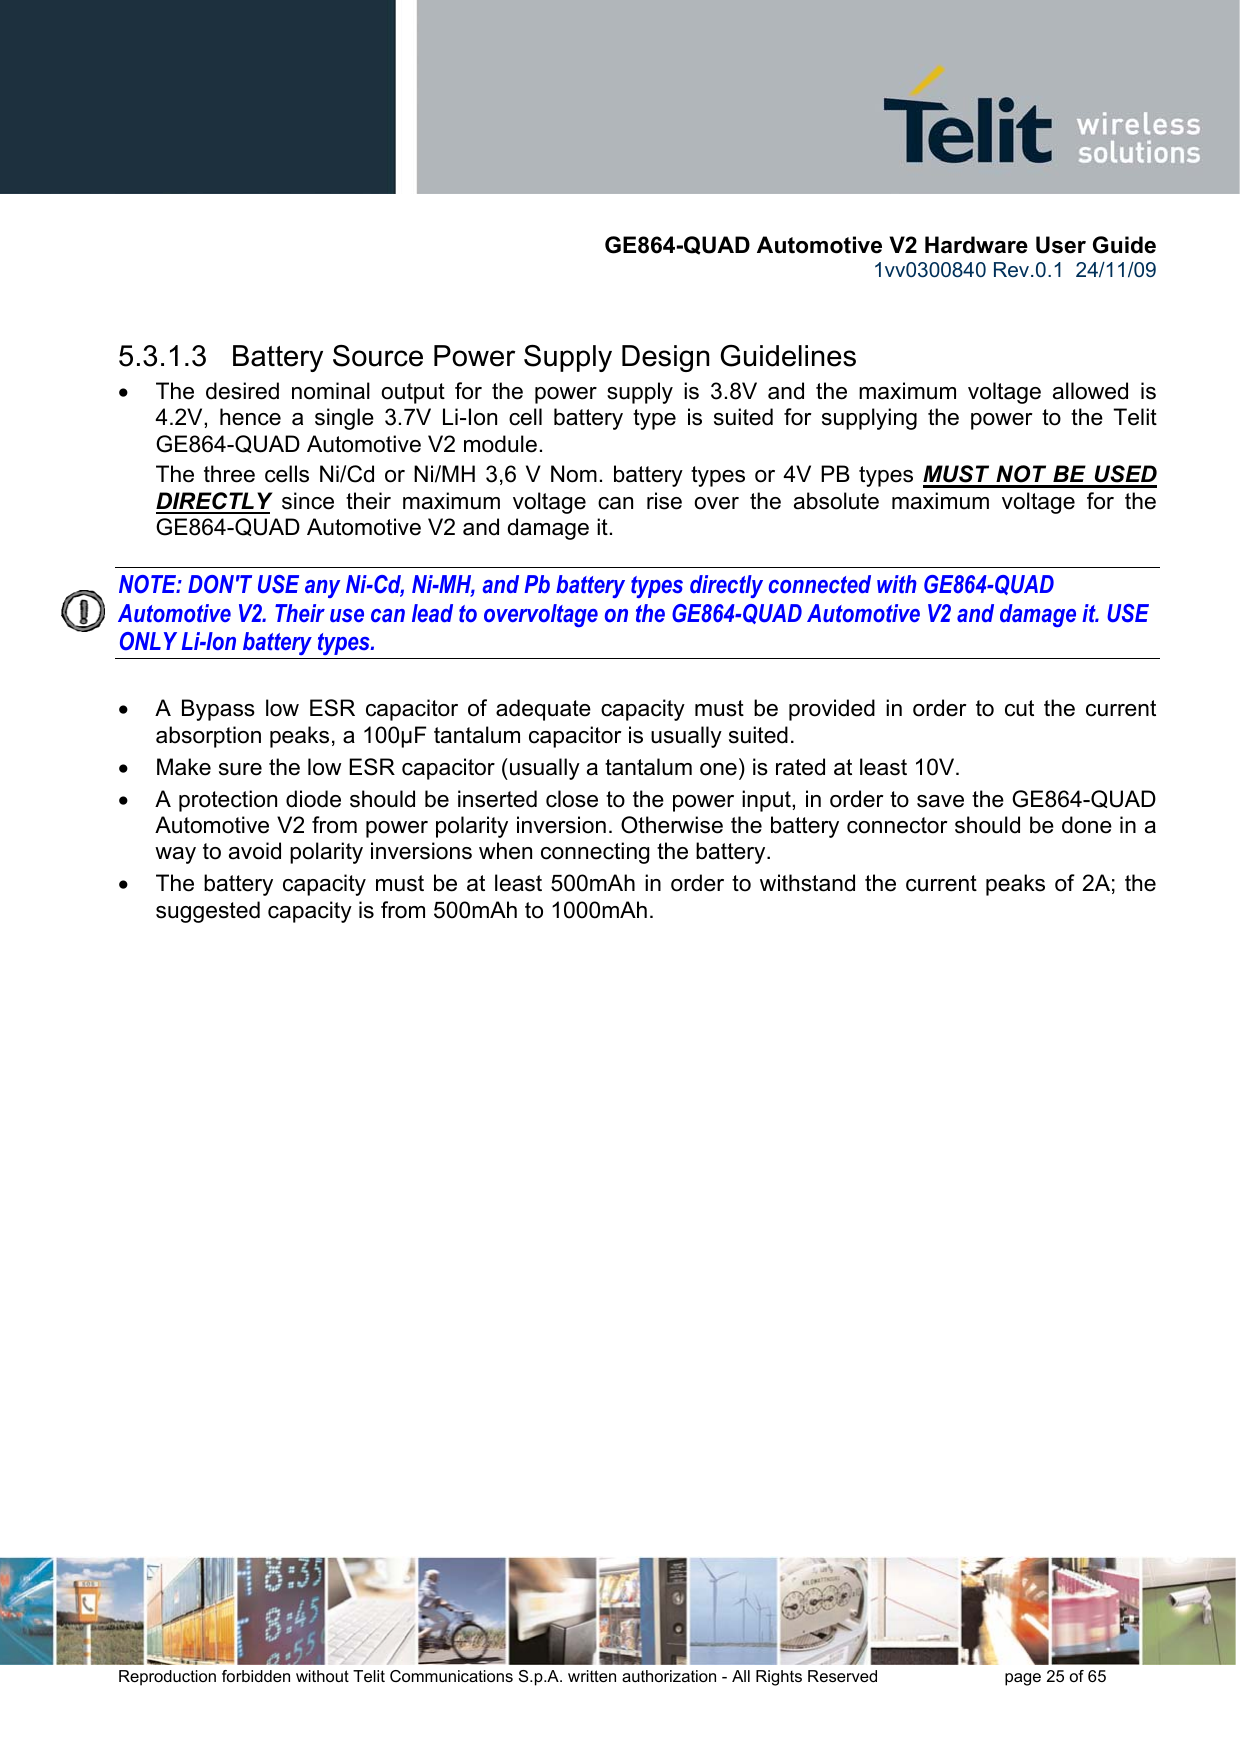       GE864-QUAD Automotive V2 Hardware User Guide 1vv0300840 Rev.0.1  24/11/09      Reproduction forbidden without Telit Communications S.p.A. written authorization - All Rights Reserved    page 25 of 65    5.3.1.3   Battery Source Power Supply Design Guidelines •  The desired nominal output for the power supply is 3.8V and the maximum voltage allowed is 4.2V, hence a single 3.7V Li-Ion cell battery type is suited for supplying the power to the Telit GE864-QUAD Automotive V2 module. The three cells Ni/Cd or Ni/MH 3,6 V Nom. battery types or 4V PB types MUST NOT BE USED DIRECTLY since their maximum voltage can rise over the absolute maximum voltage for the GE864-QUAD Automotive V2 and damage it.  NOTE: DON&apos;T USE any Ni-Cd, Ni-MH, and Pb battery types directly connected with GE864-QUAD Automotive V2. Their use can lead to overvoltage on the GE864-QUAD Automotive V2 and damage it. USE ONLY Li-Ion battery types.  •  A Bypass low ESR capacitor of adequate capacity must be provided in order to cut the current absorption peaks, a 100μF tantalum capacitor is usually suited. •  Make sure the low ESR capacitor (usually a tantalum one) is rated at least 10V. •  A protection diode should be inserted close to the power input, in order to save the GE864-QUAD Automotive V2 from power polarity inversion. Otherwise the battery connector should be done in a way to avoid polarity inversions when connecting the battery. •  The battery capacity must be at least 500mAh in order to withstand the current peaks of 2A; the suggested capacity is from 500mAh to 1000mAh. 